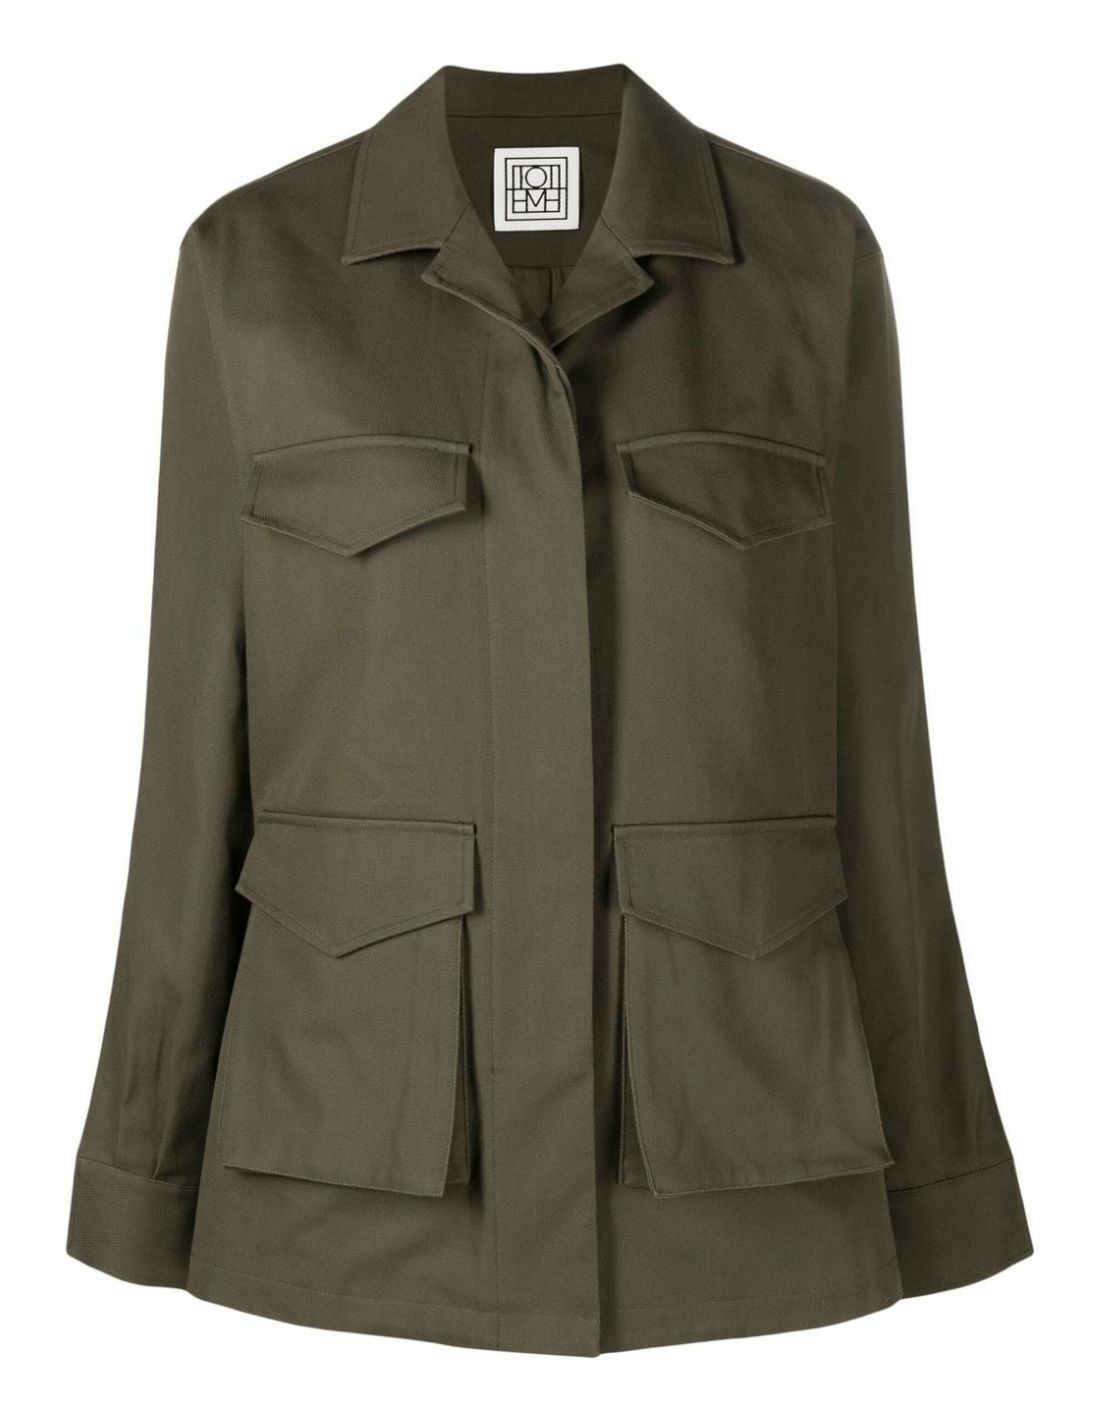 Toteme army jacket in khaki spring-summer 2023